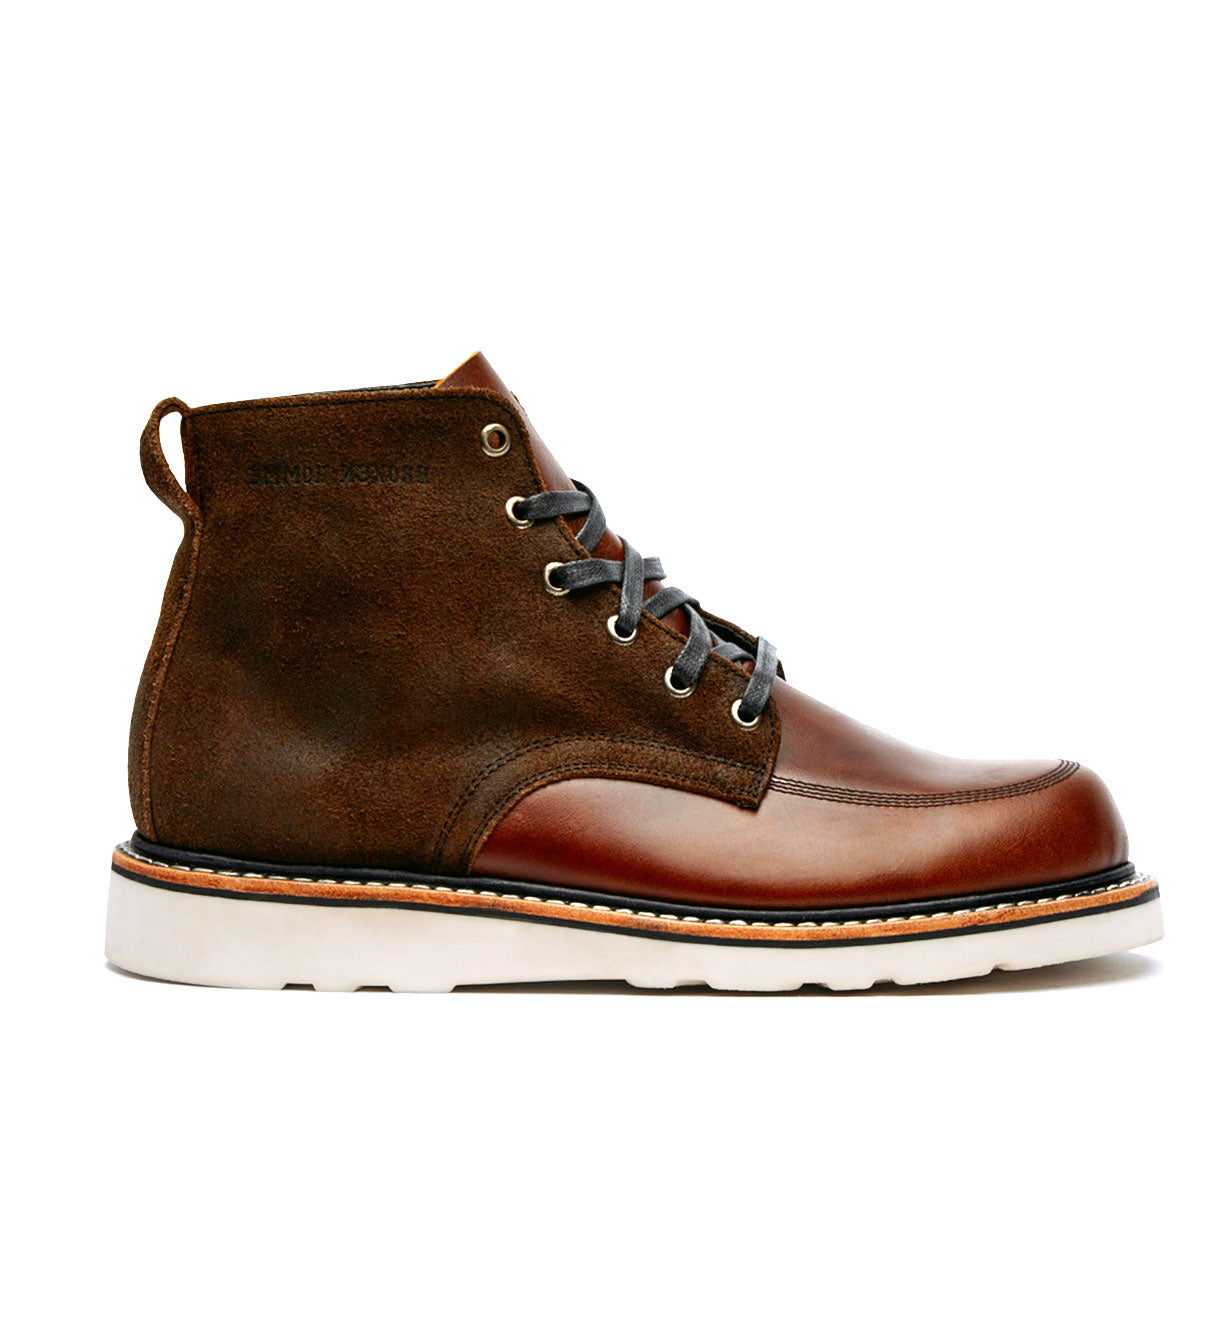 A brown leather Jaime Boot by Broken Homme with a comfortable fit.